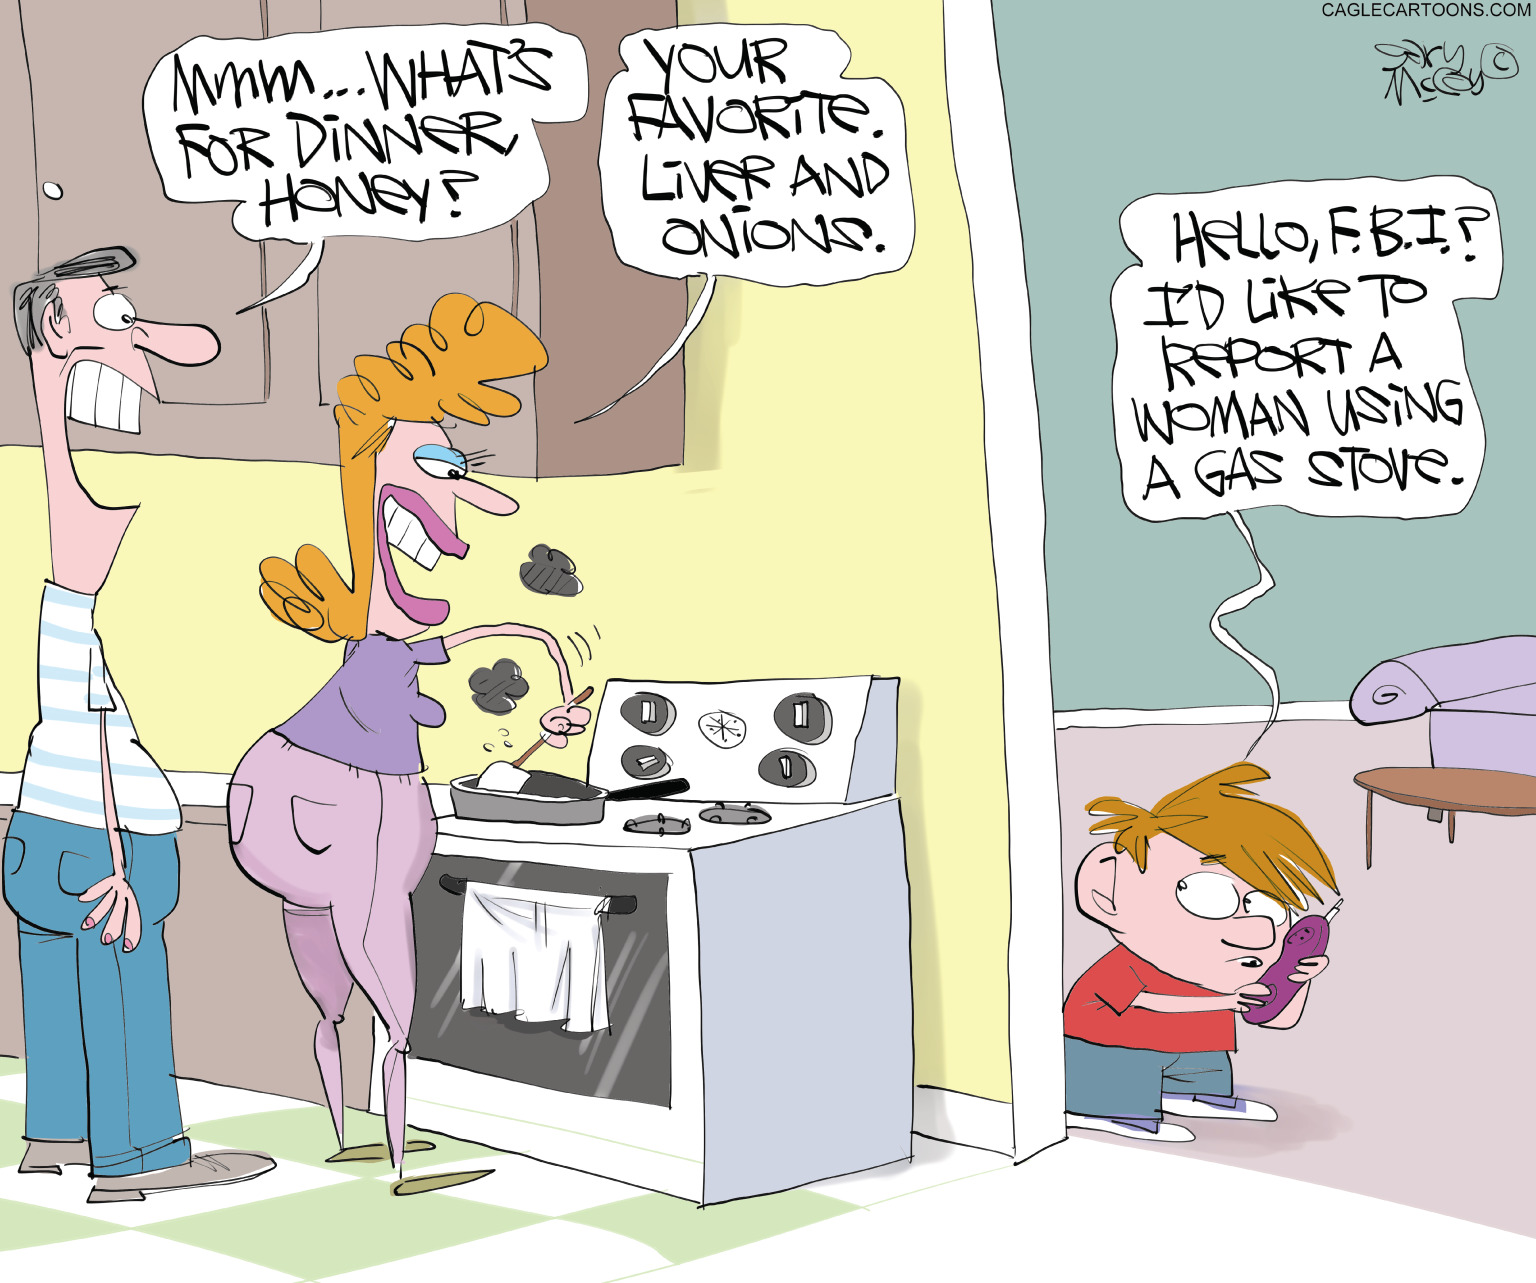 Editorial Cartoon: Gas Stove Snitch - The Independent | News Events Opinion  More